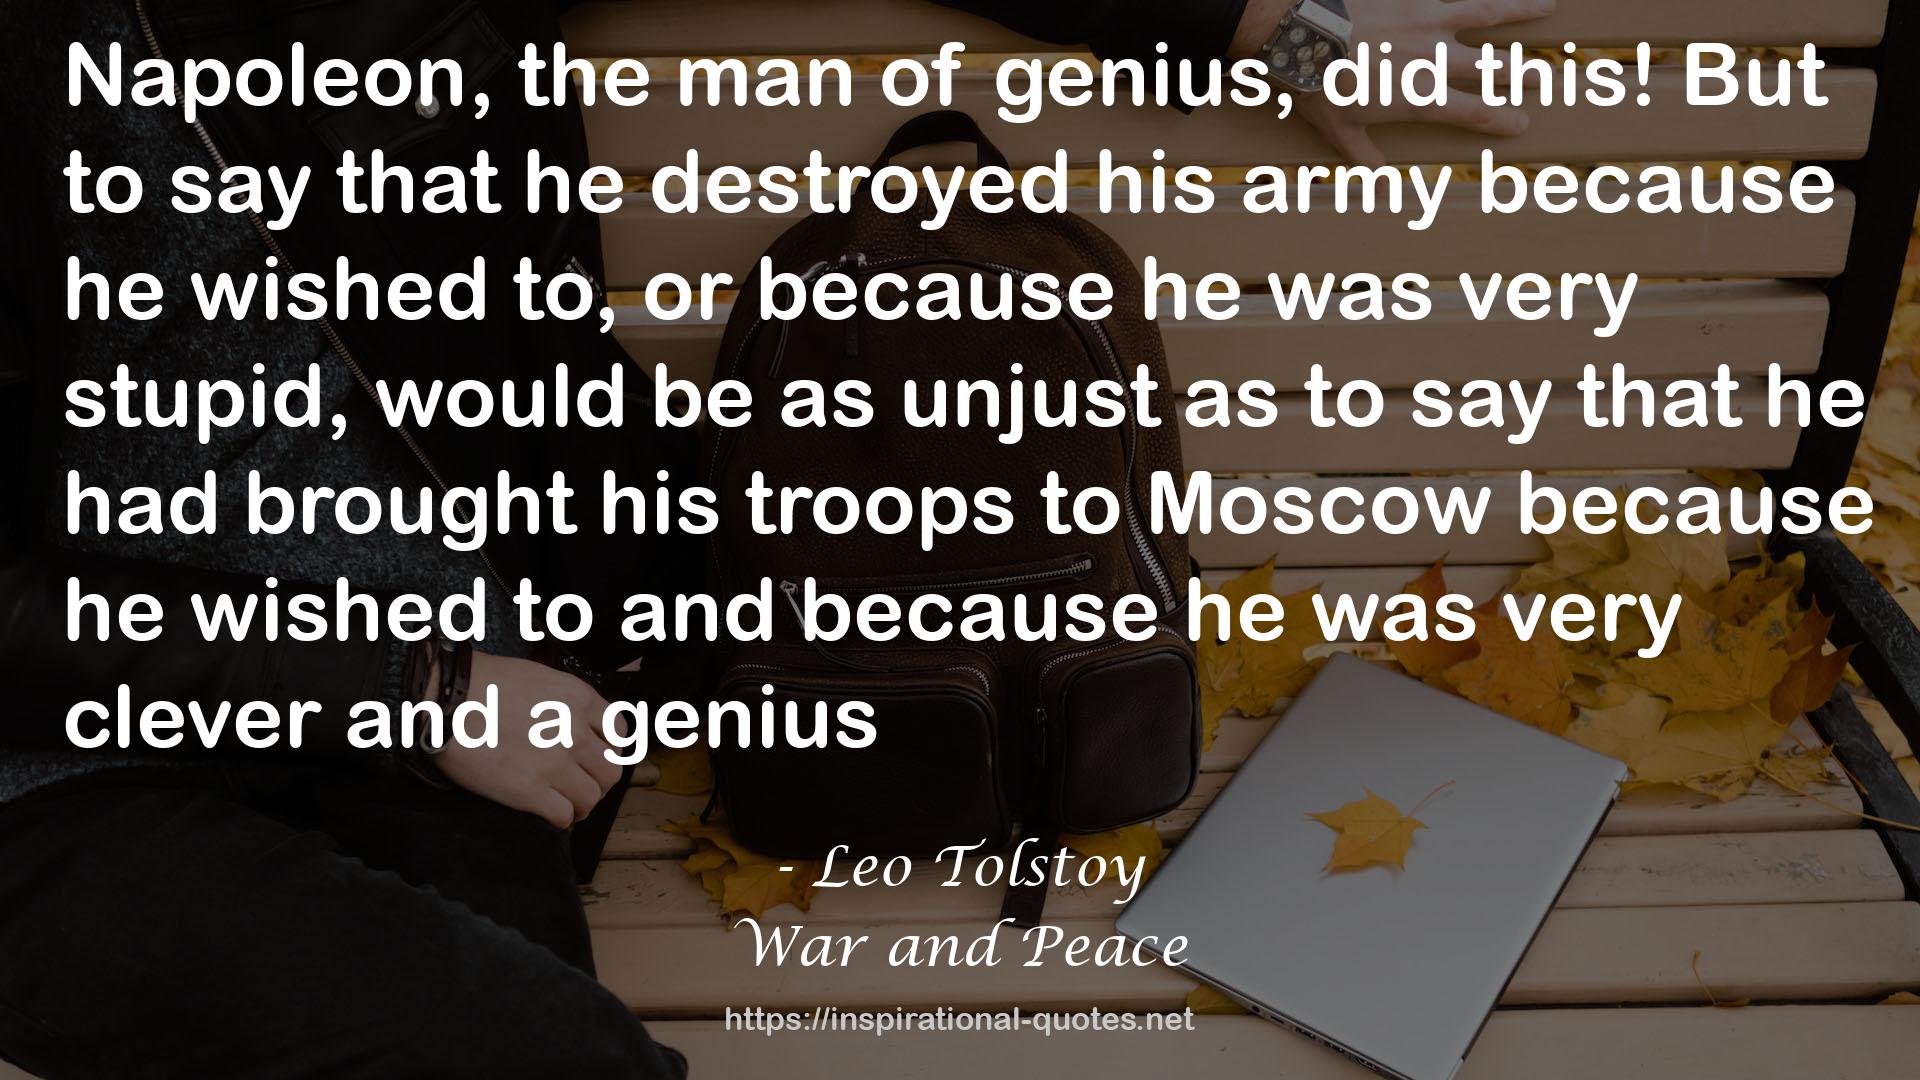 War and Peace QUOTES